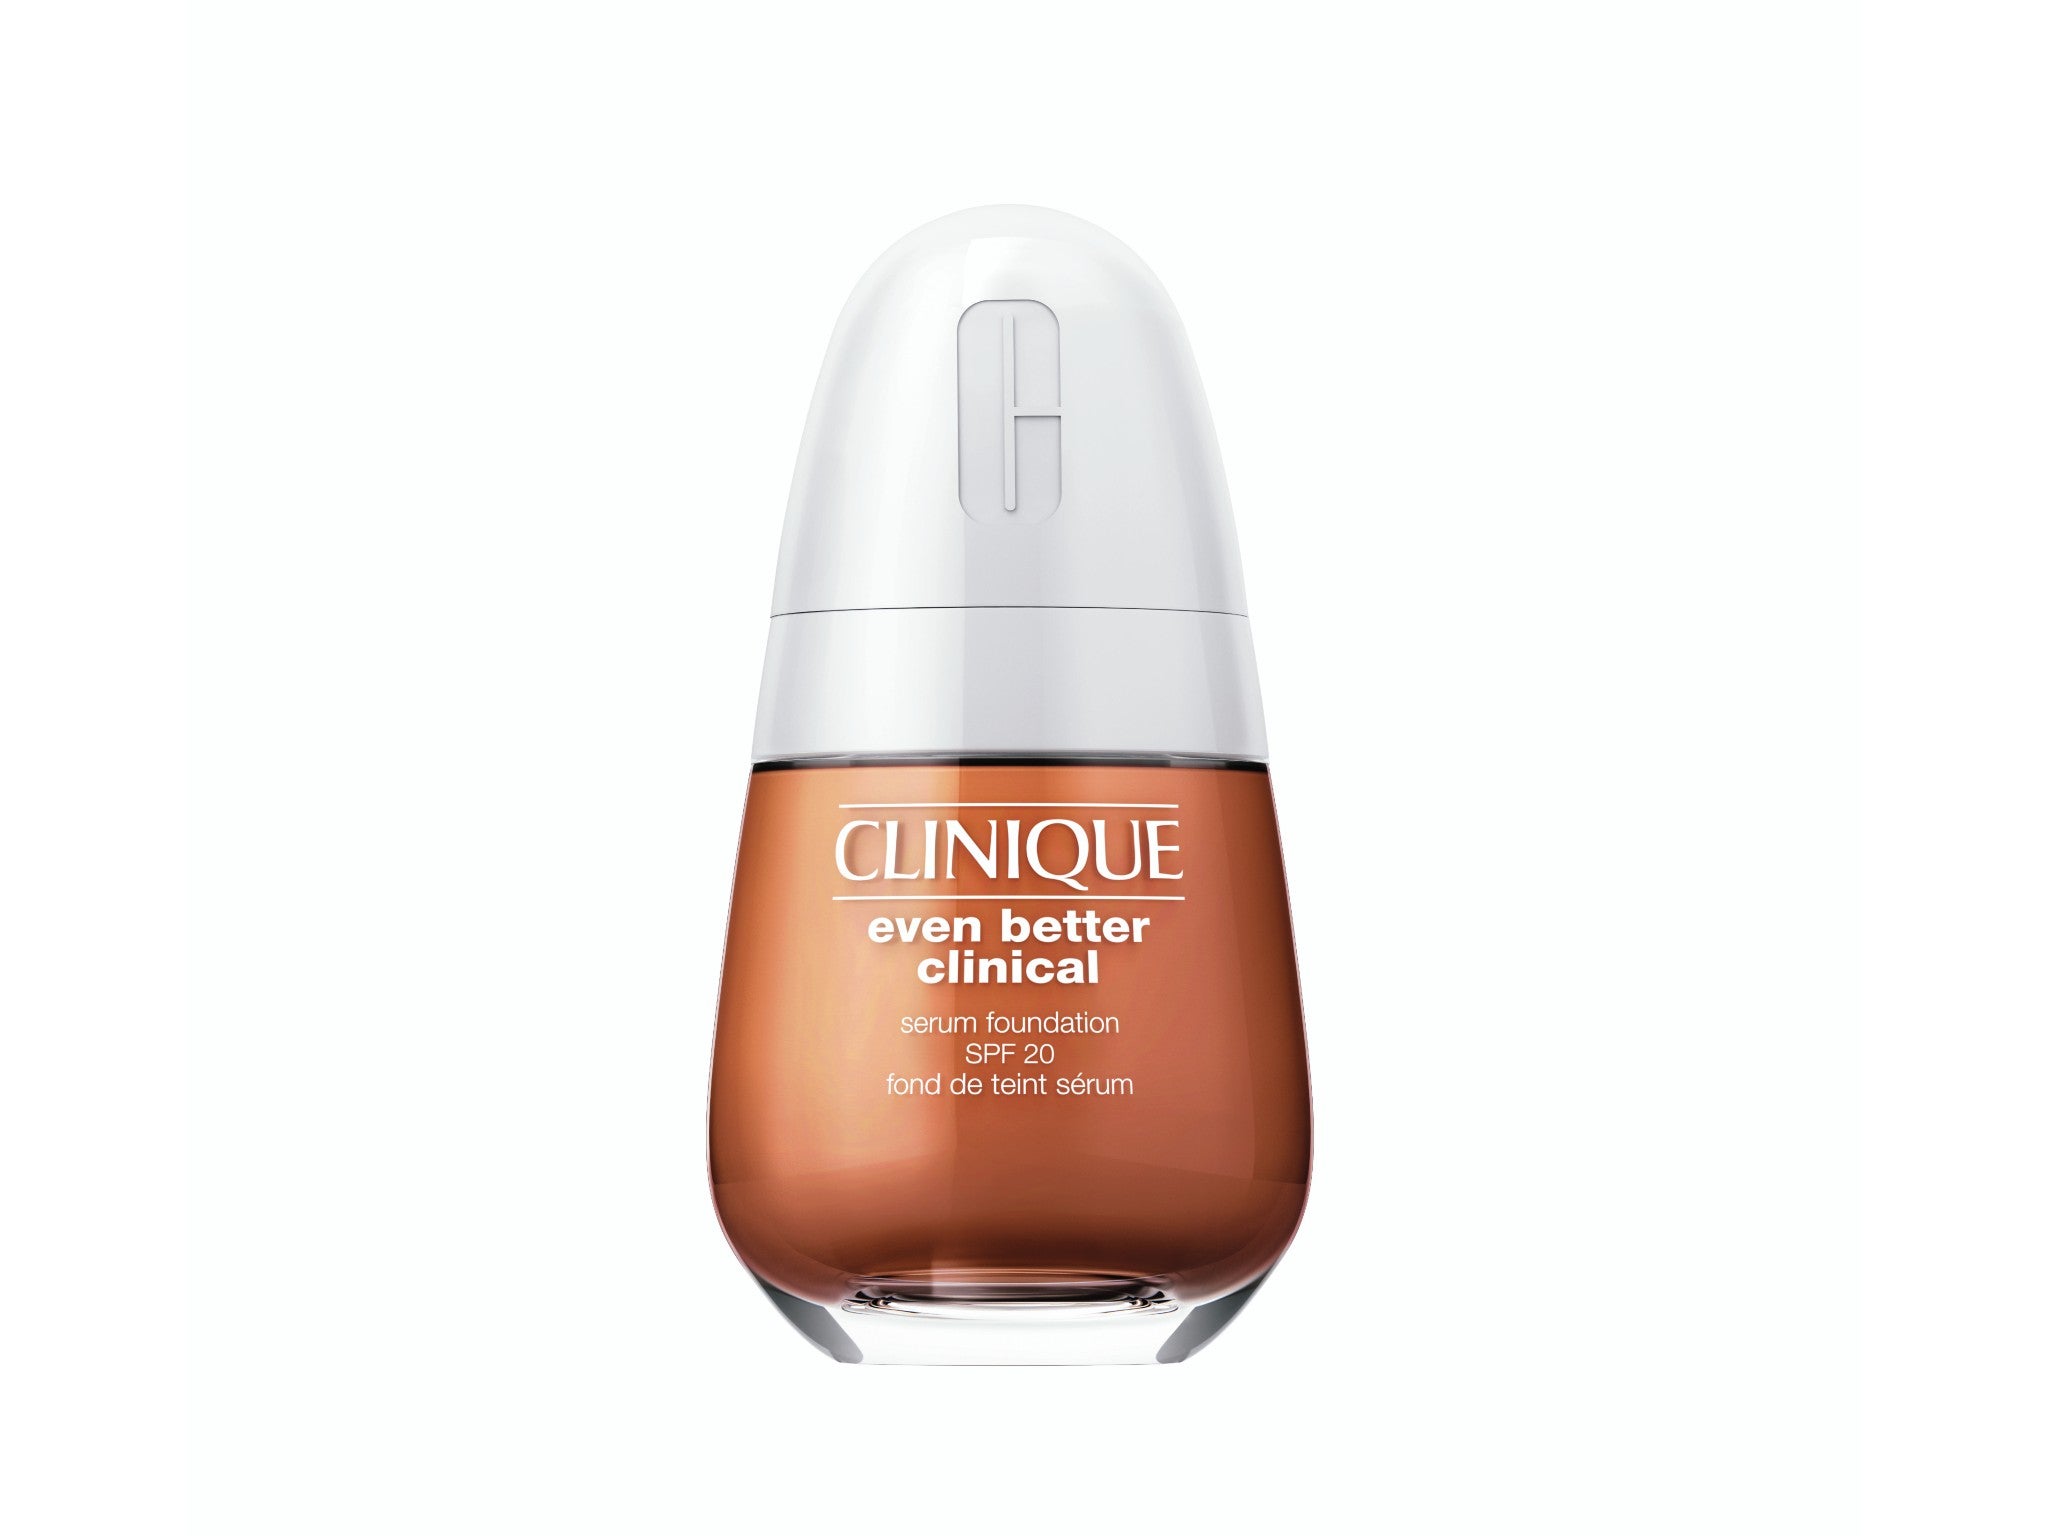 Clinique even better clinical serum foundation indybest